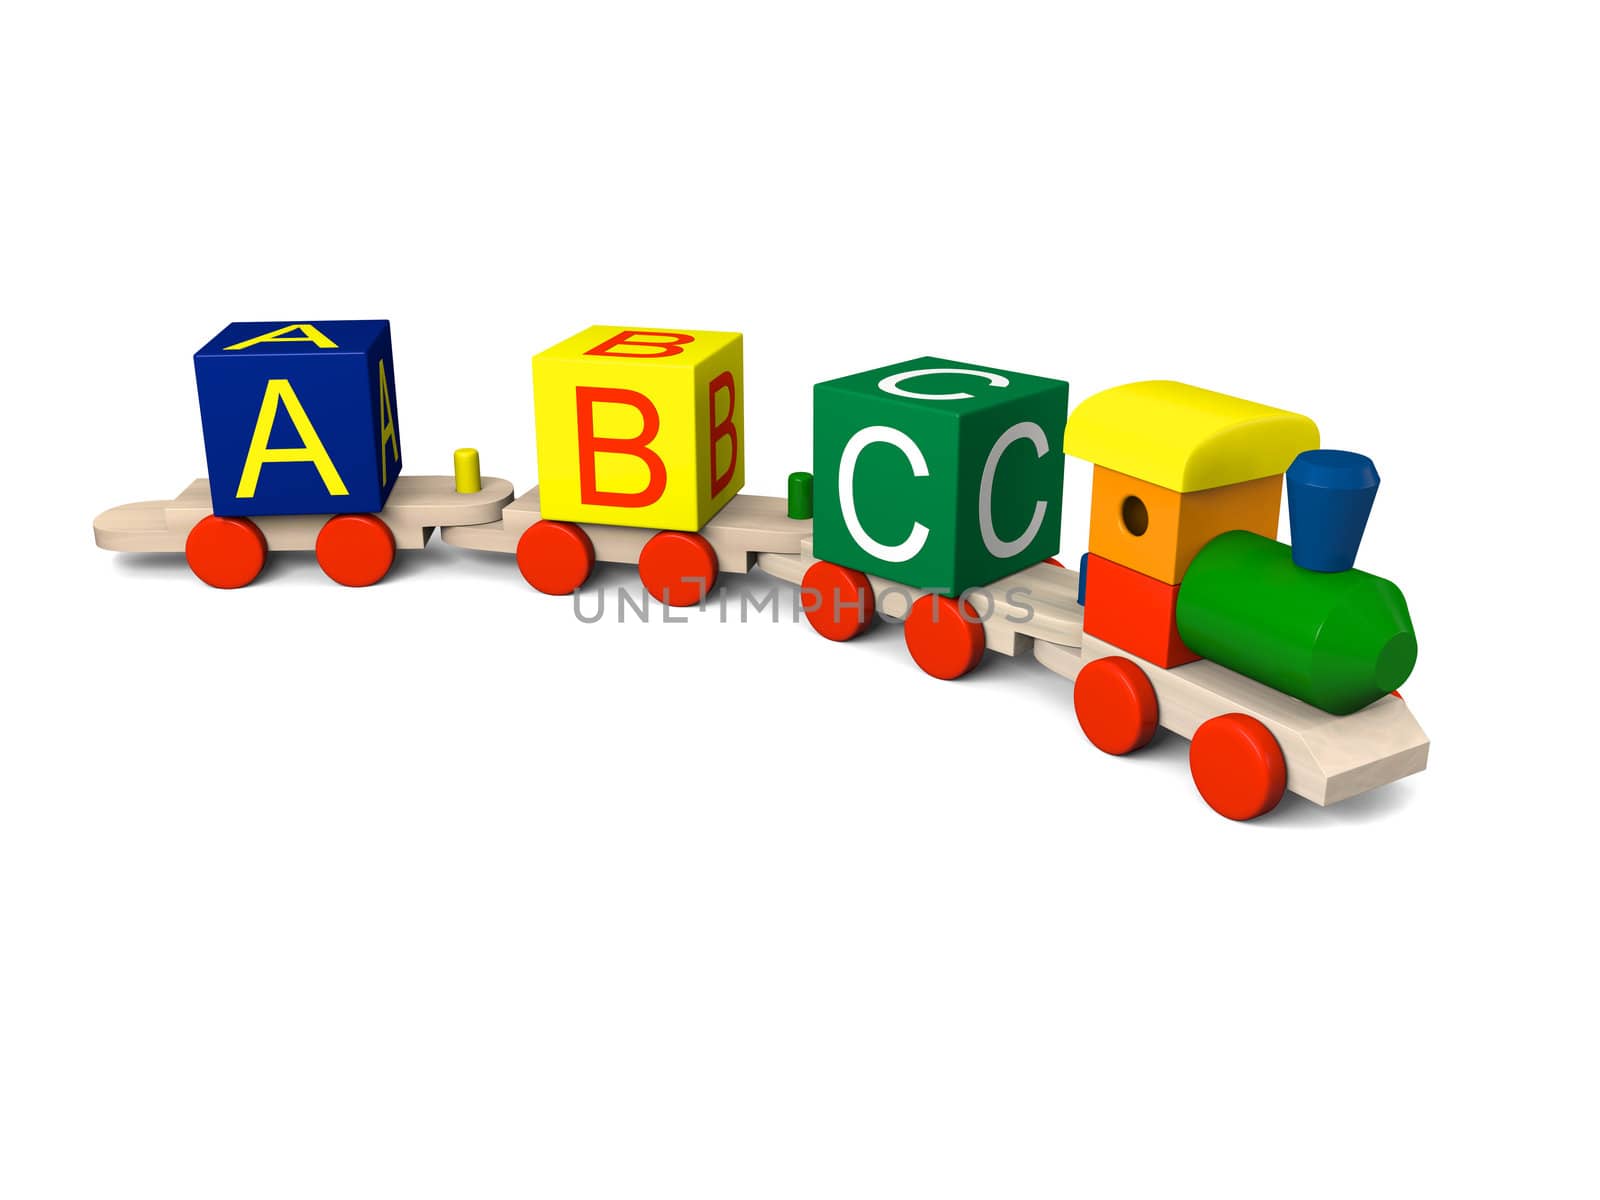 3D illustration of colorful wooden toy train with alphabet letters on the carriages